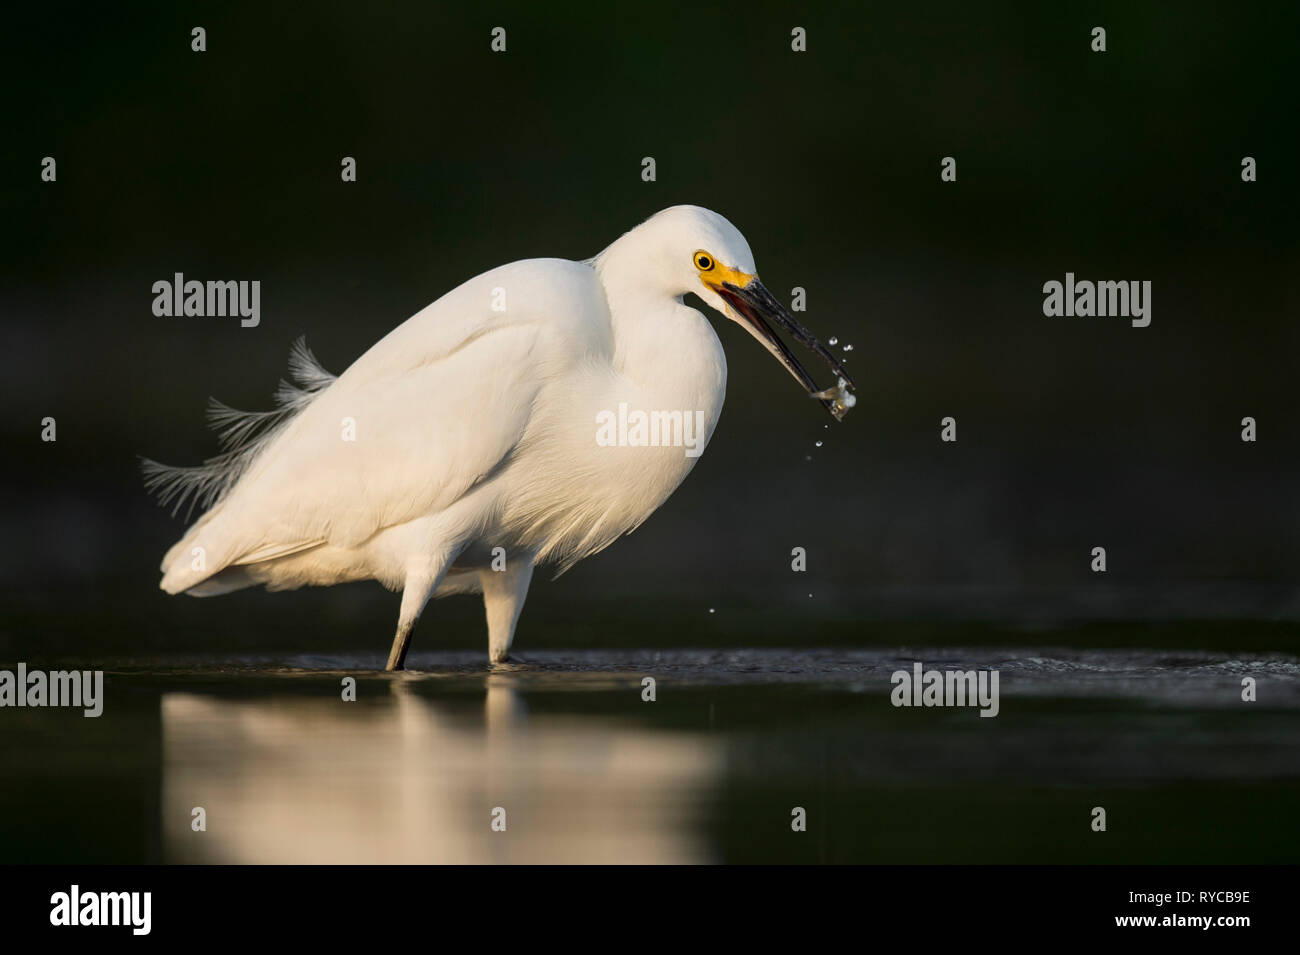 A bright white Snowy Egret catches a small minnow in the golden morning sun with a dark background. Stock Photo